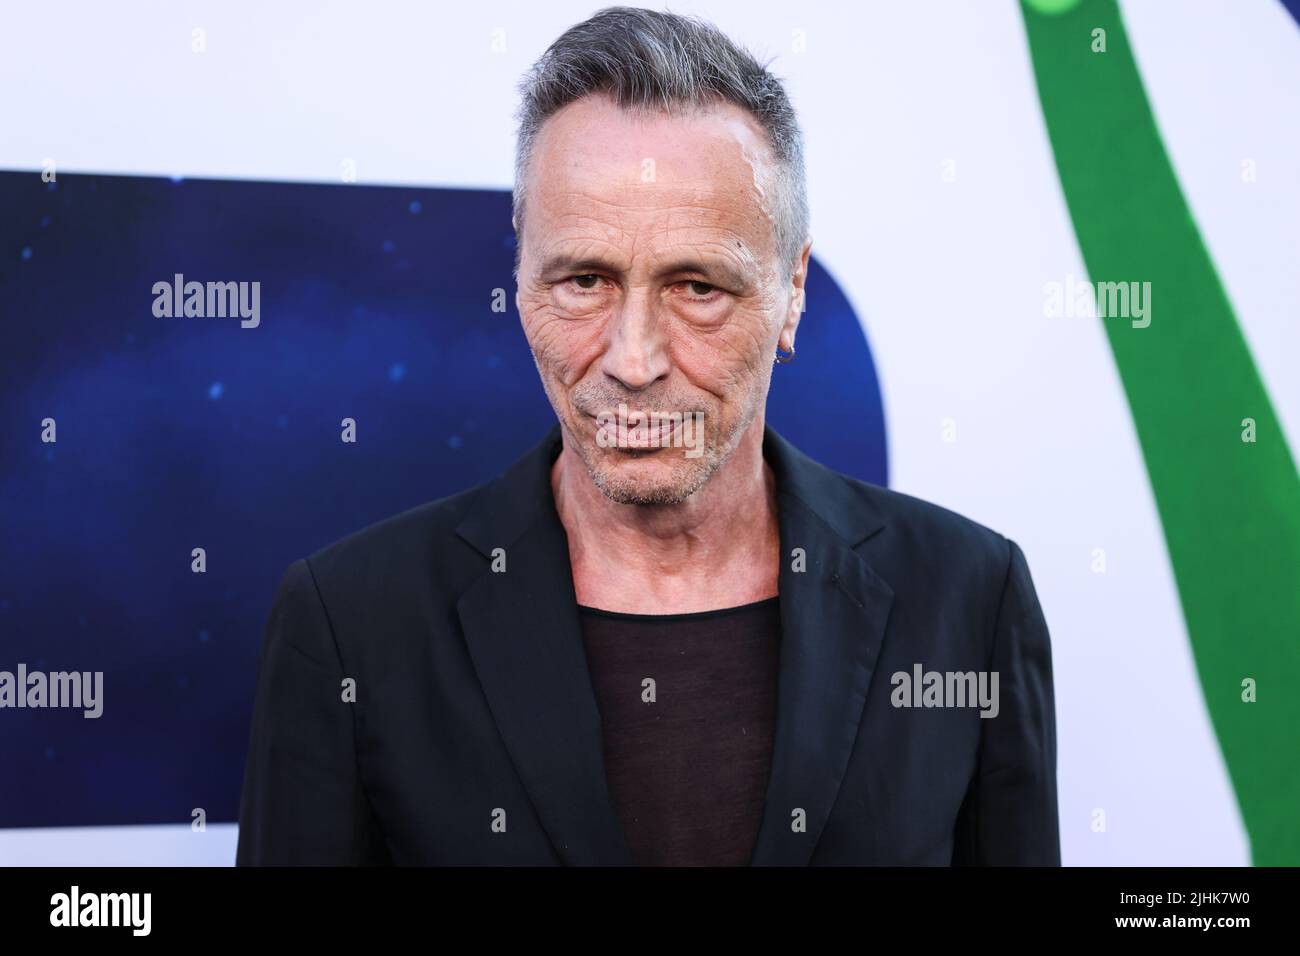 HOLLYWOOD, LOS ANGELES, CALIFORNIA, USA - JULY 18: Michael Wincott arrives at the World Premiere Of Universal Pictures' 'Nope' held at the TCL Chinese Theatre IMAX on July 18, 2022 in Hollywood, Los Angeles, California, United States. (Photo by Xavier Collin/Image Press Agency) Stock Photo